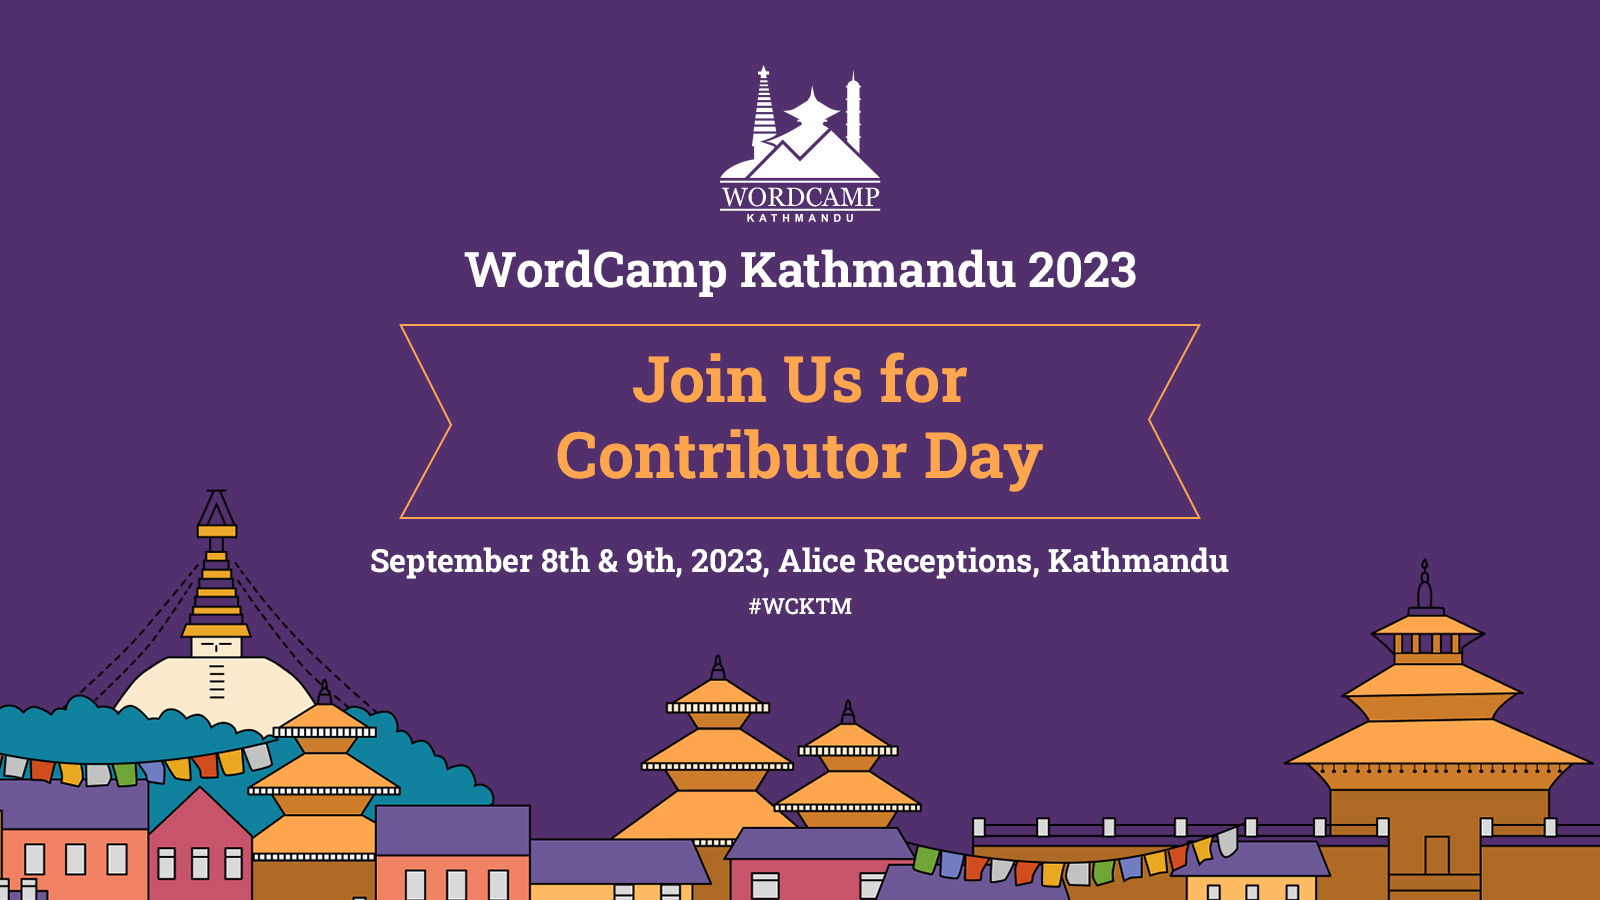 Join Us for Contributor Day at WordCamp Kathmandu 2023!